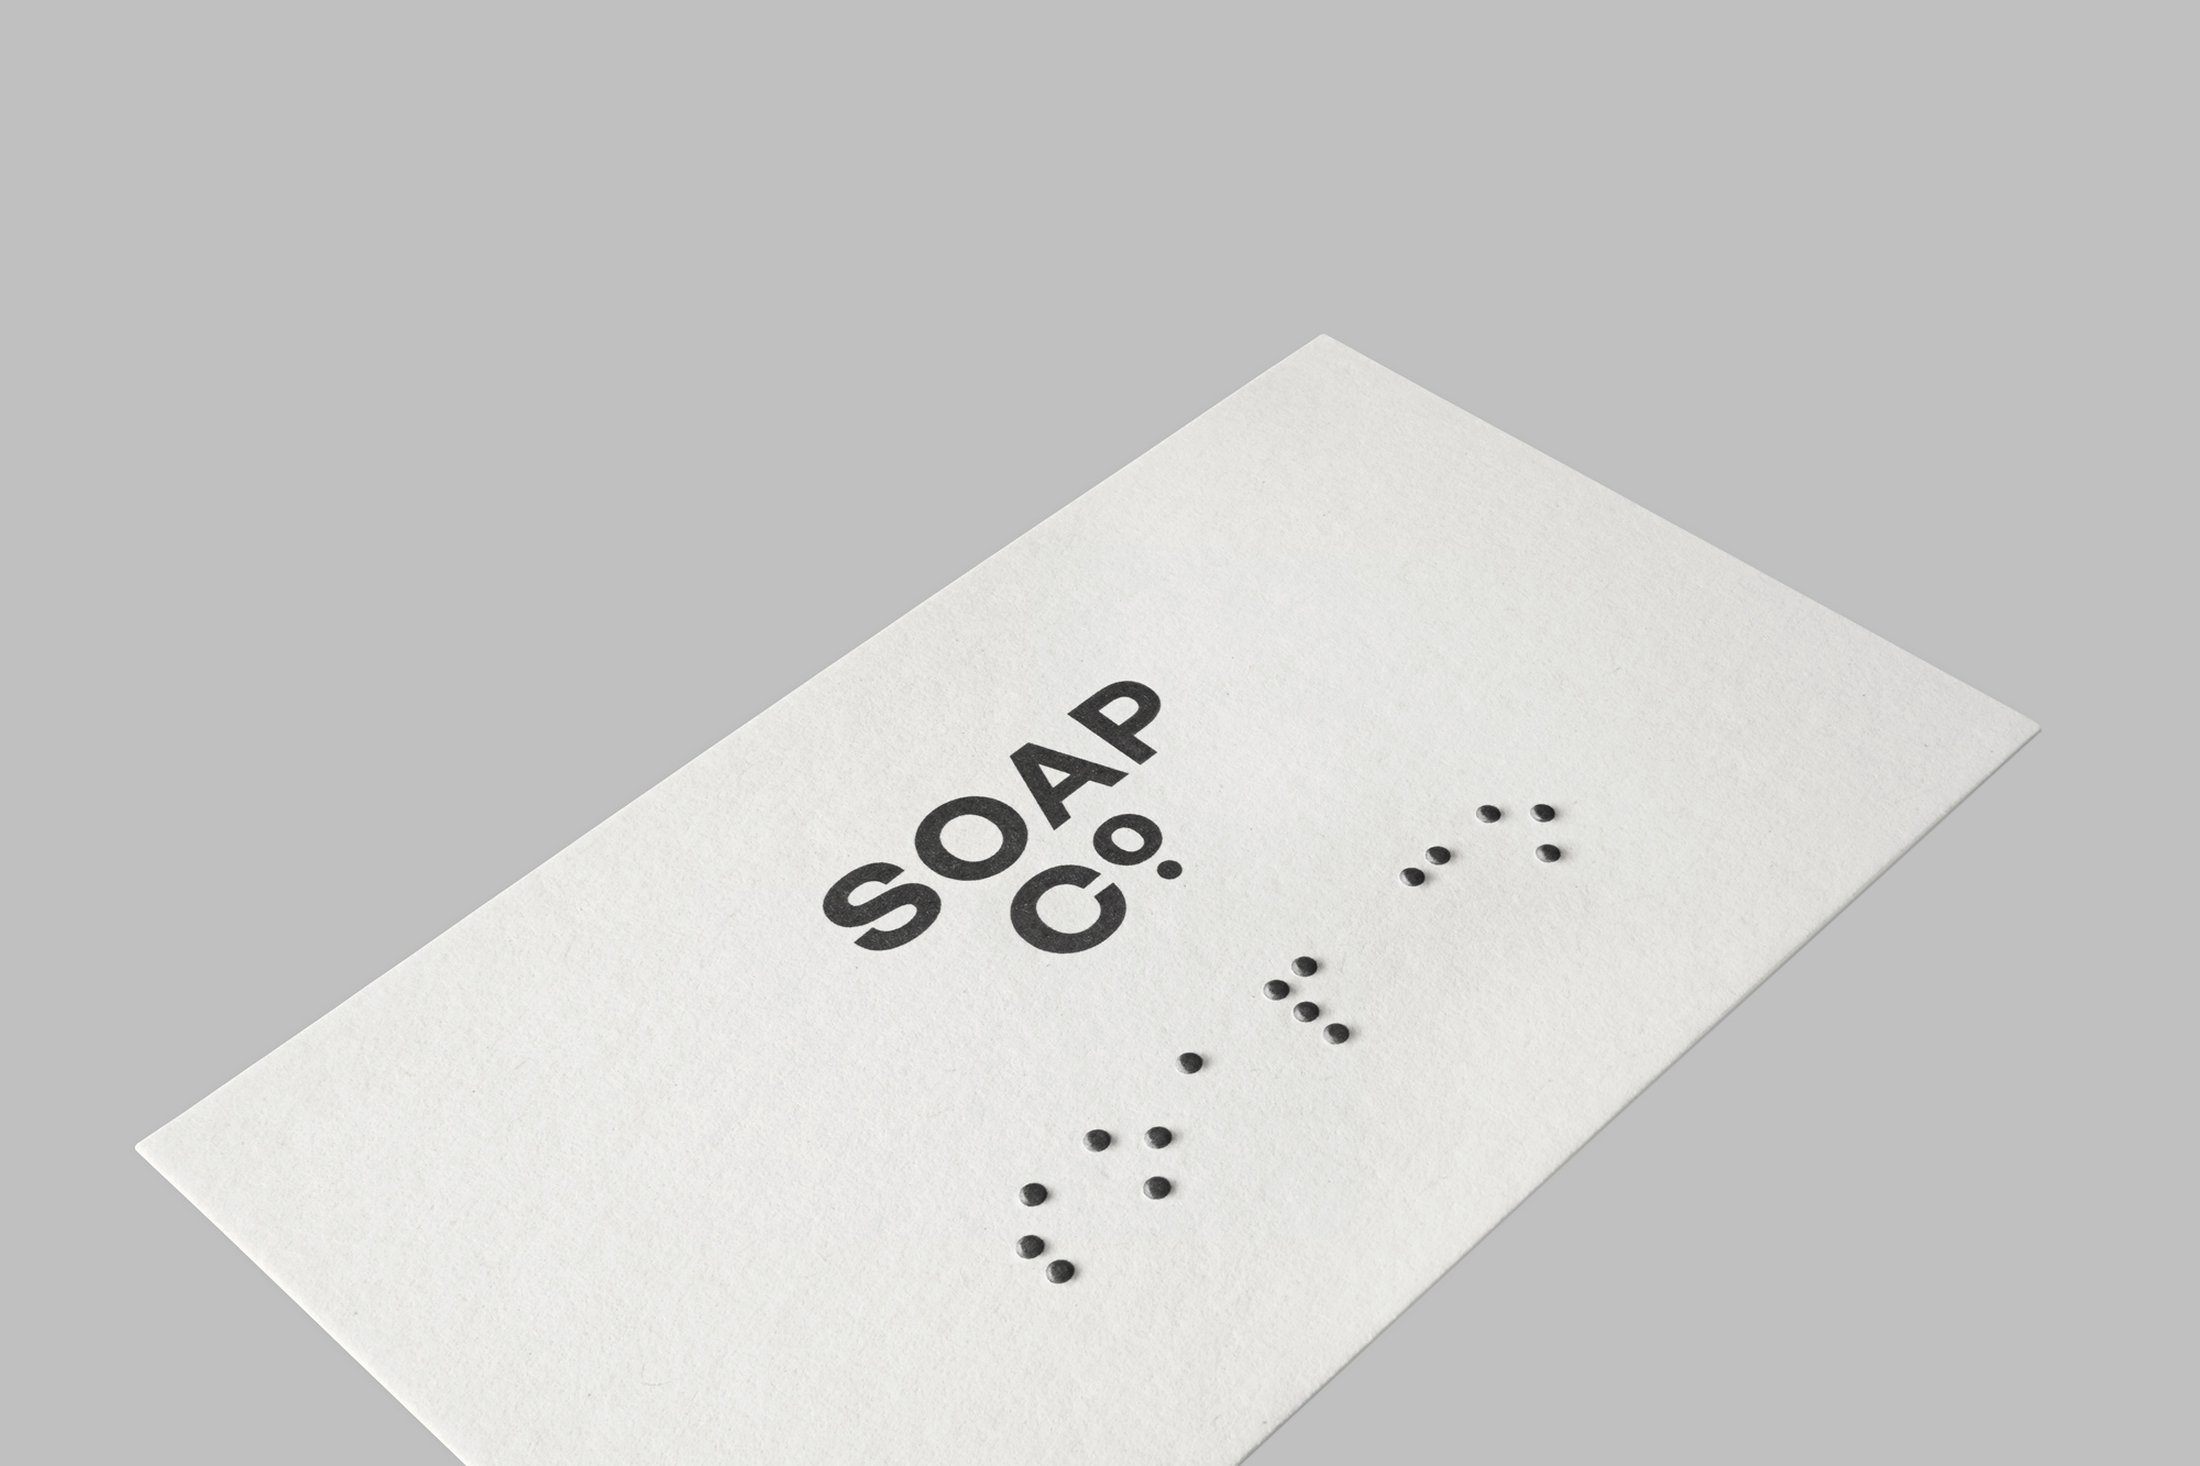 Brand identity design and braille business cards by UK based graphic design studio Paul Balford Ltd. for luxury hand made soap business the Soap Co. 